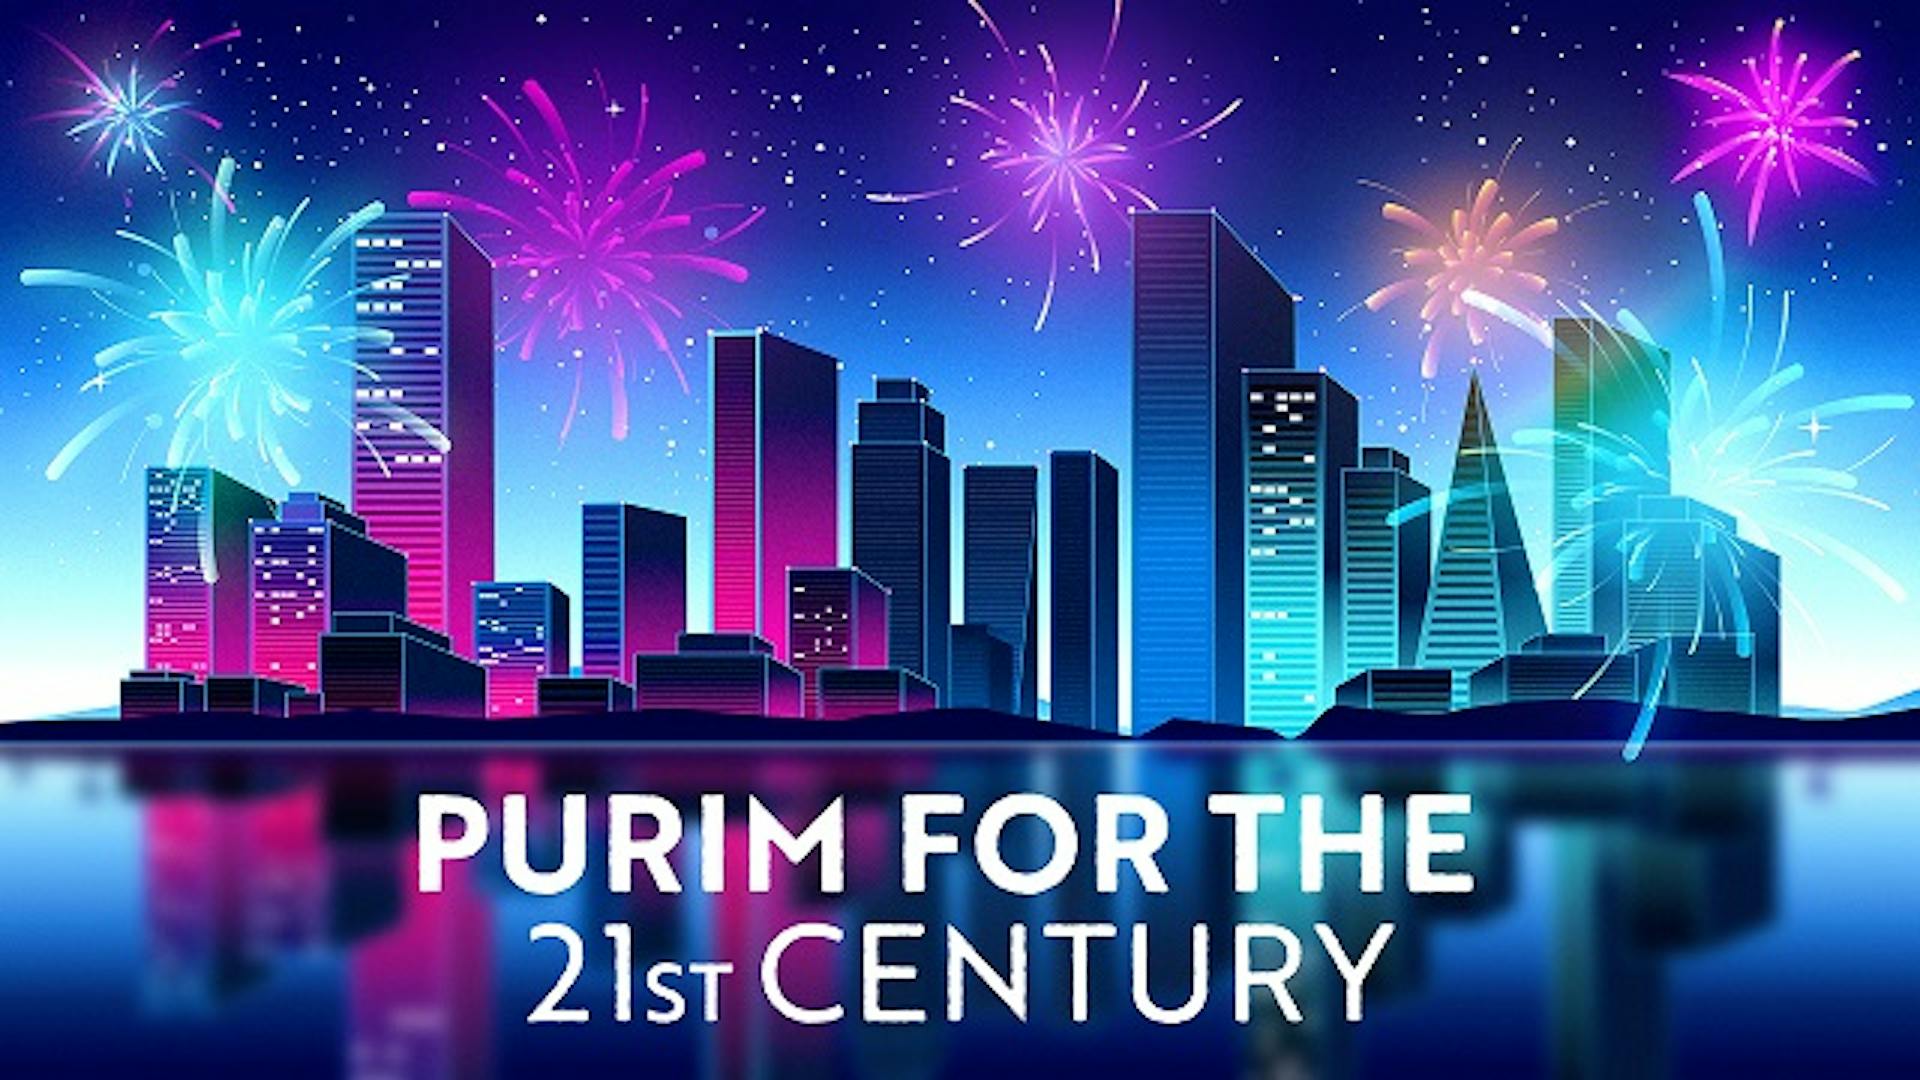 Why Is Purim So Important